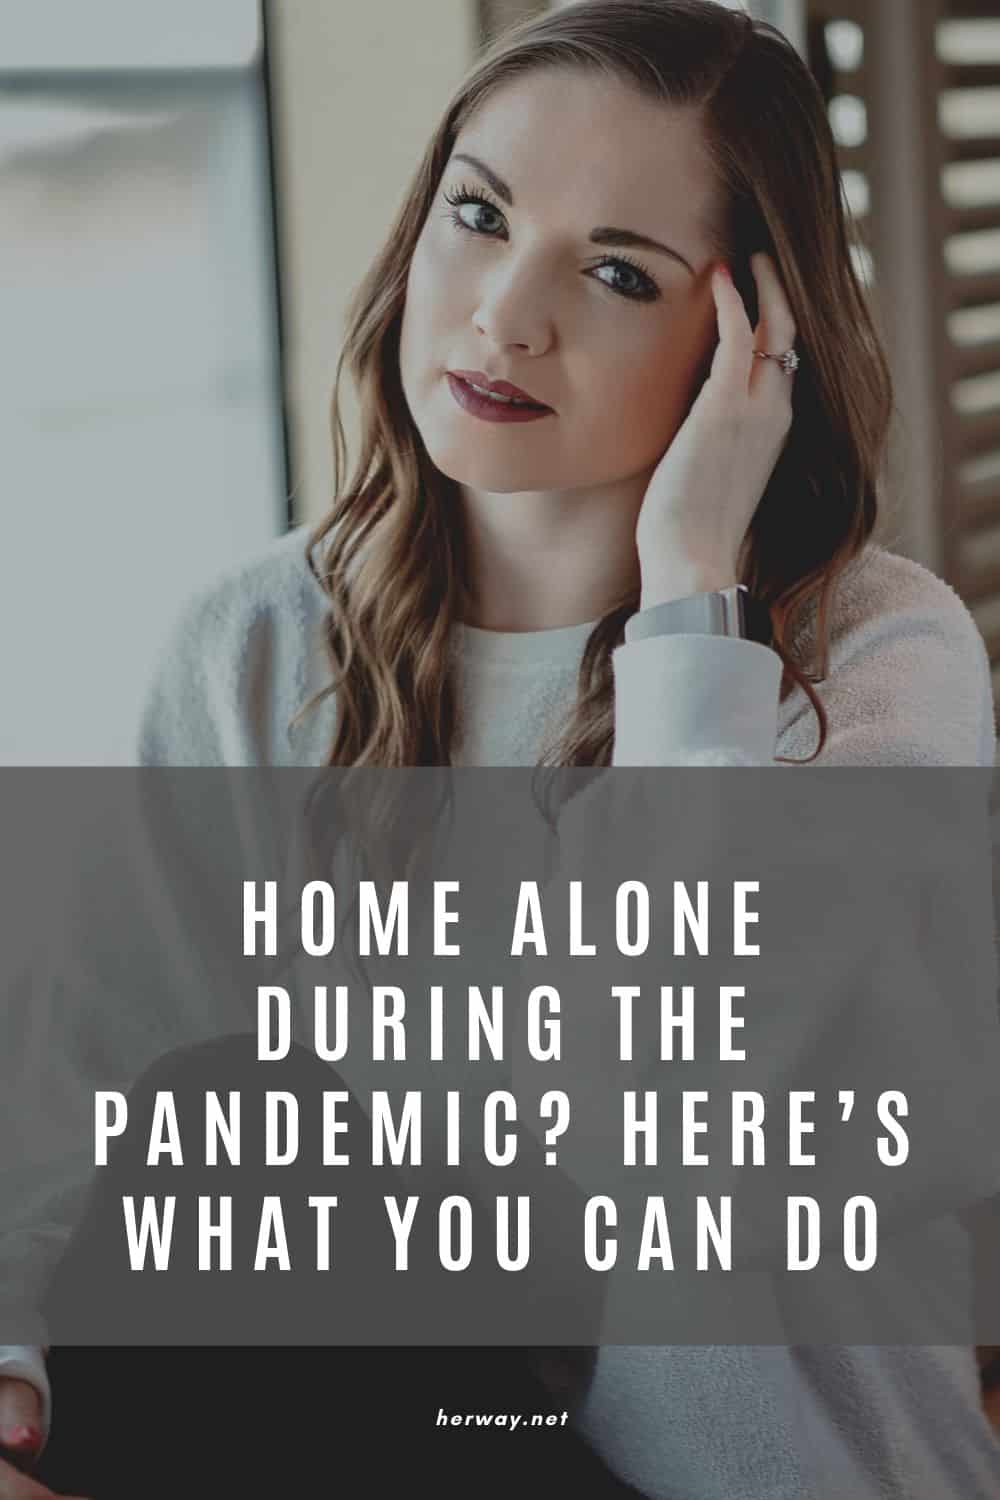 Home Alone During The Pandemic Here’s What You Can Do